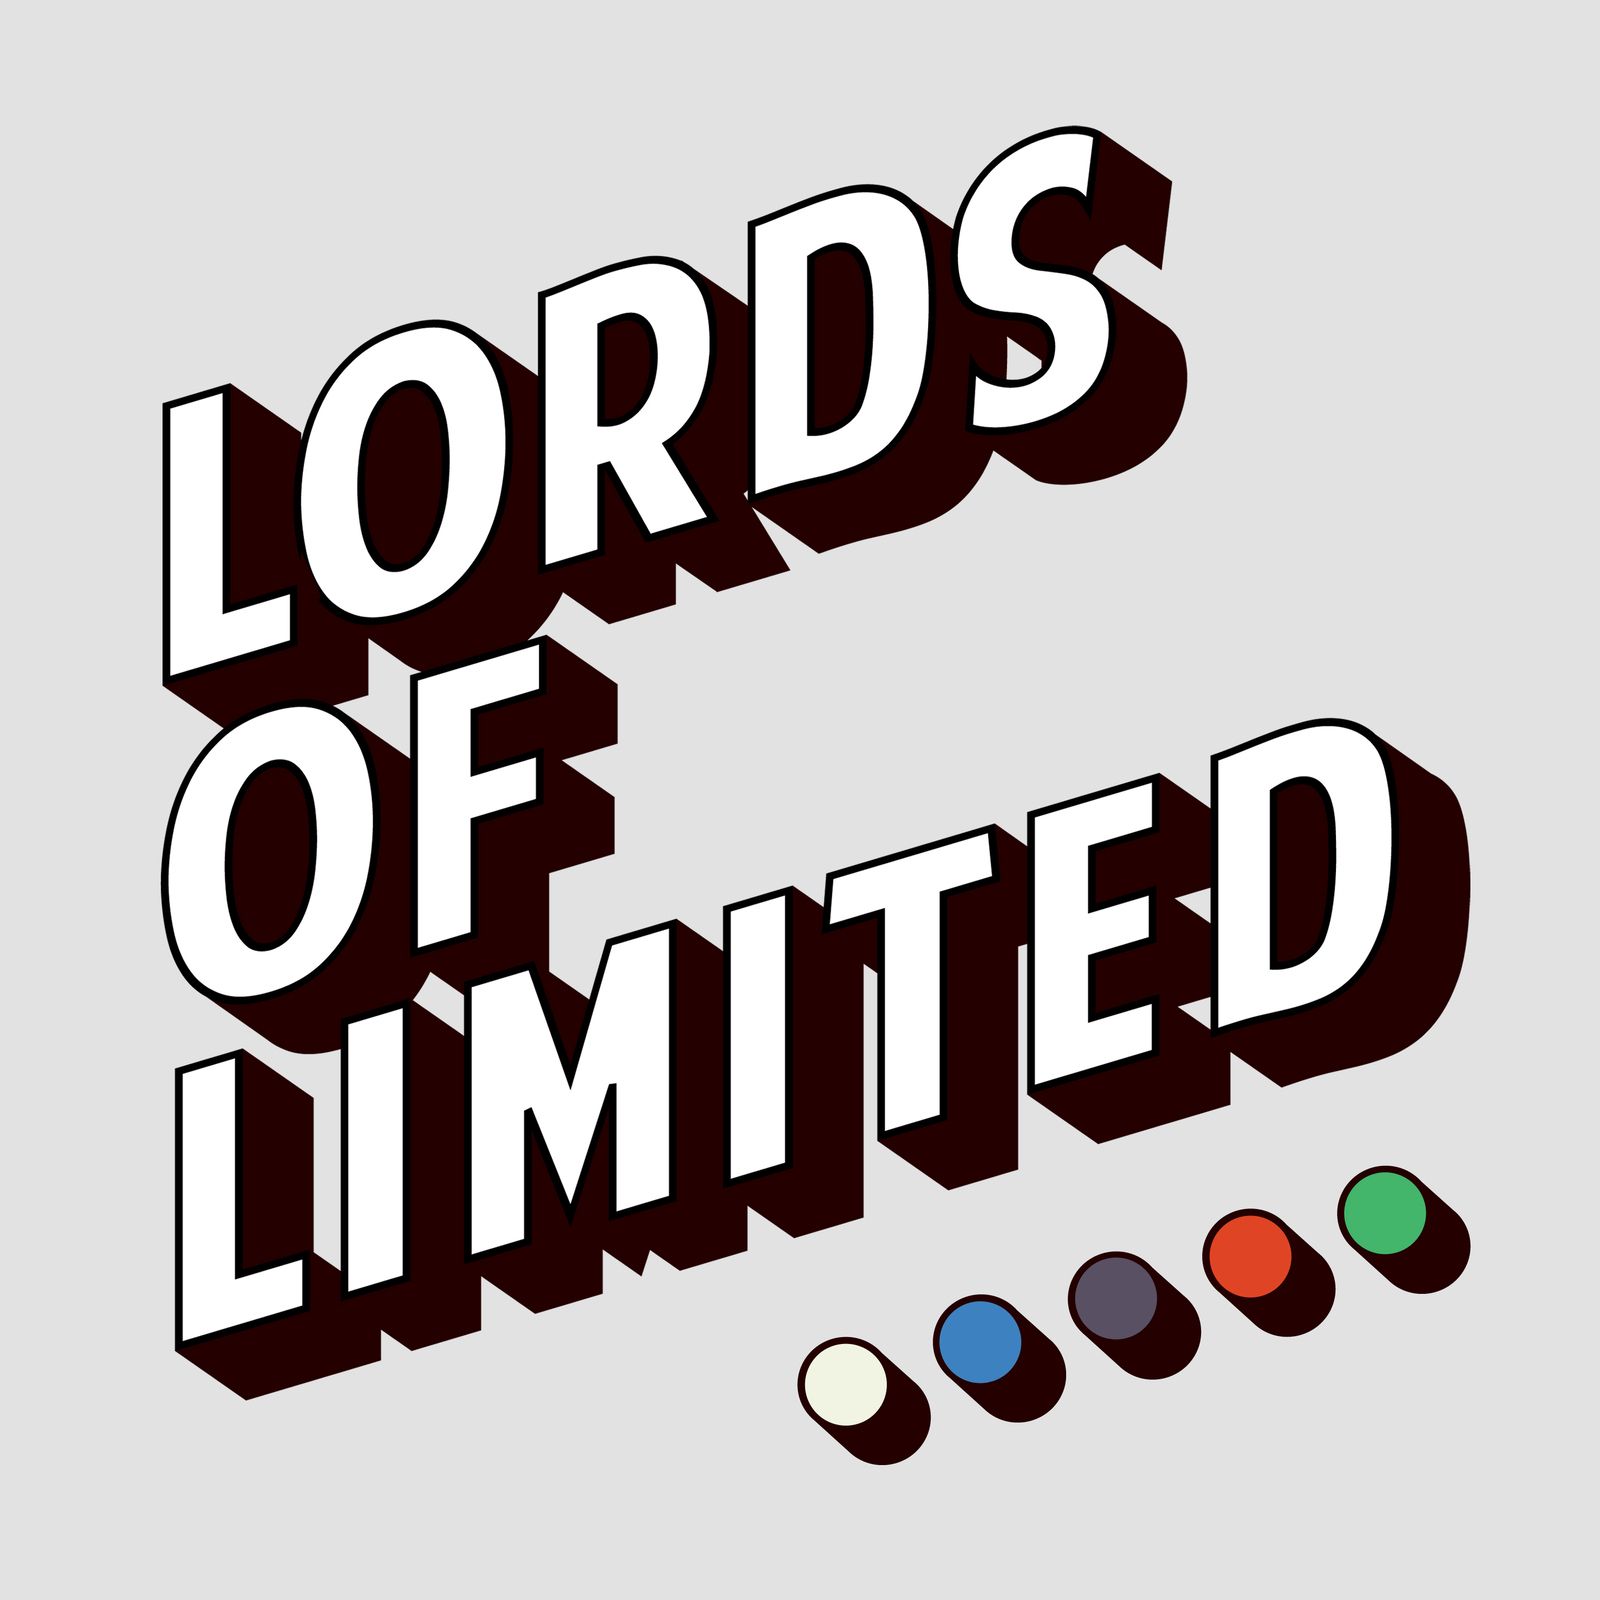 S125: Lords of Limited 125 - Making the Final Cut